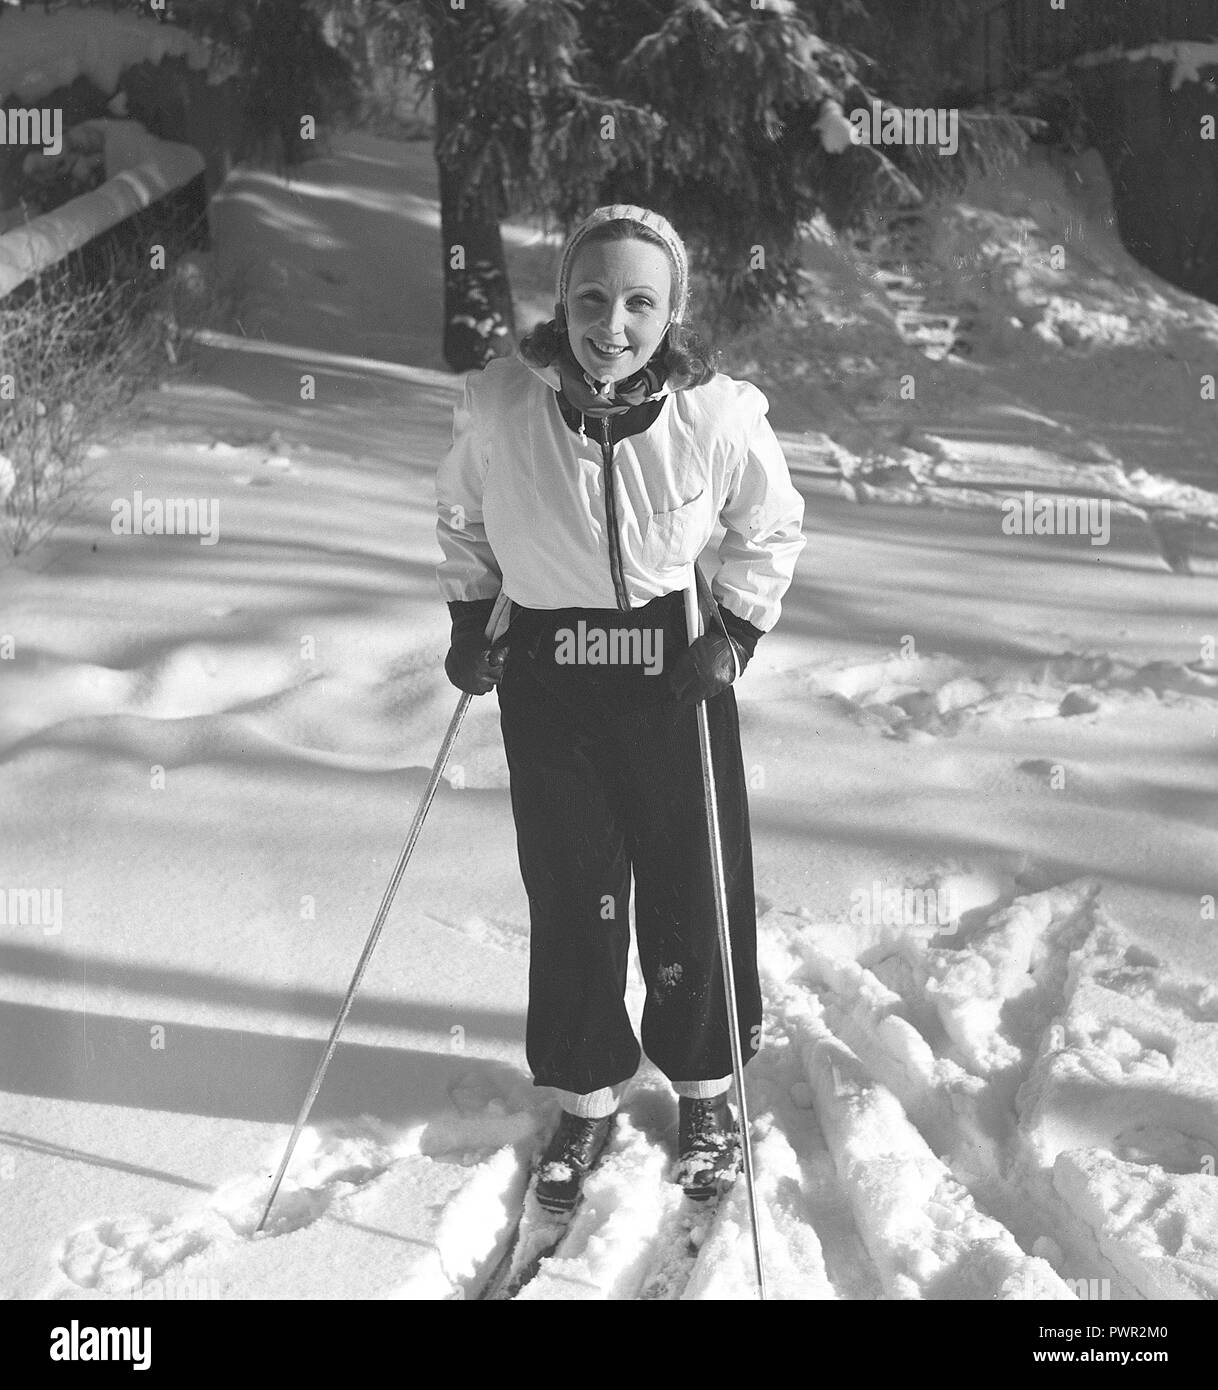 Winter in the 1940s. The young woman actress Inga Tidblad is dressed in the typical 1940s winter sports fashion. Sweden 1942. Photo Kristoffersson ref 229-7 Stock Photo